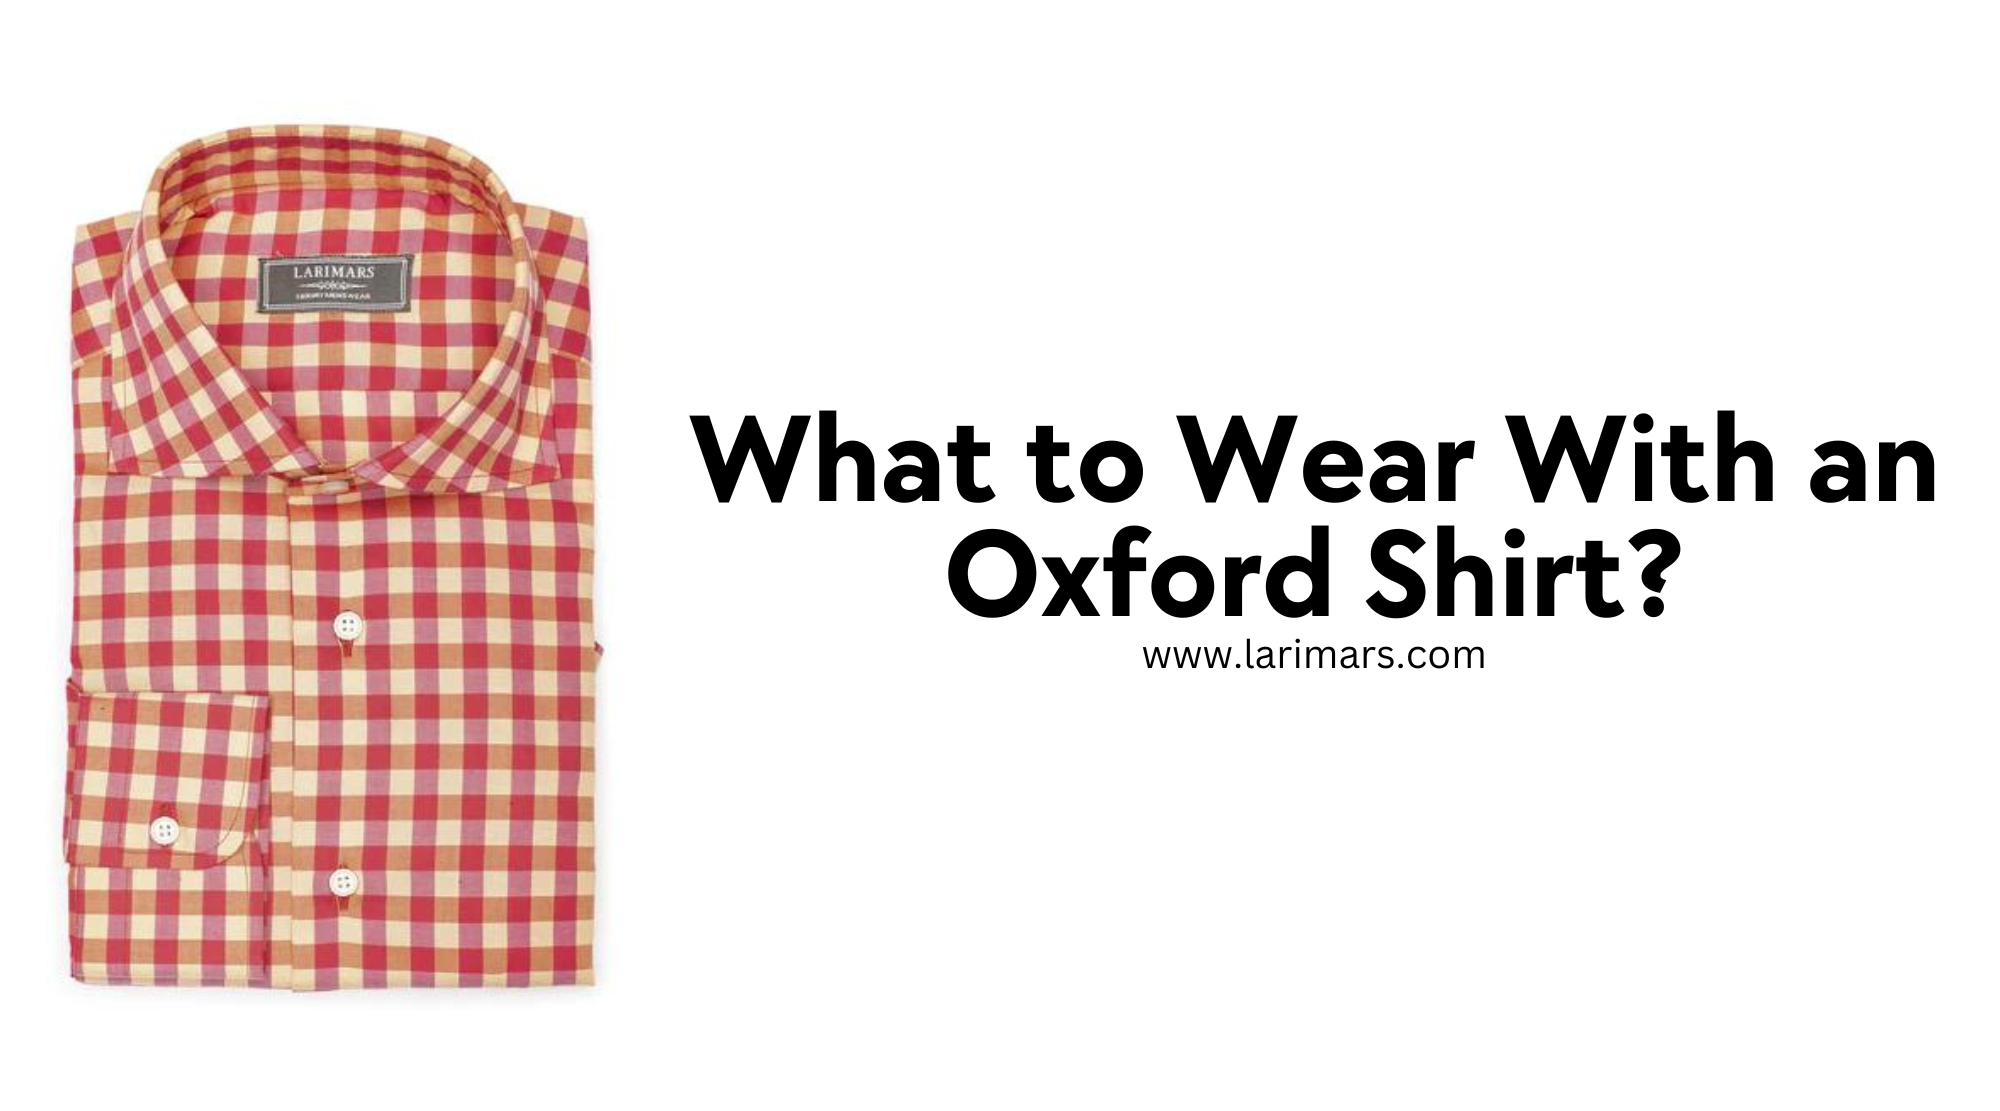 What to Wear With an Oxford Shirt?